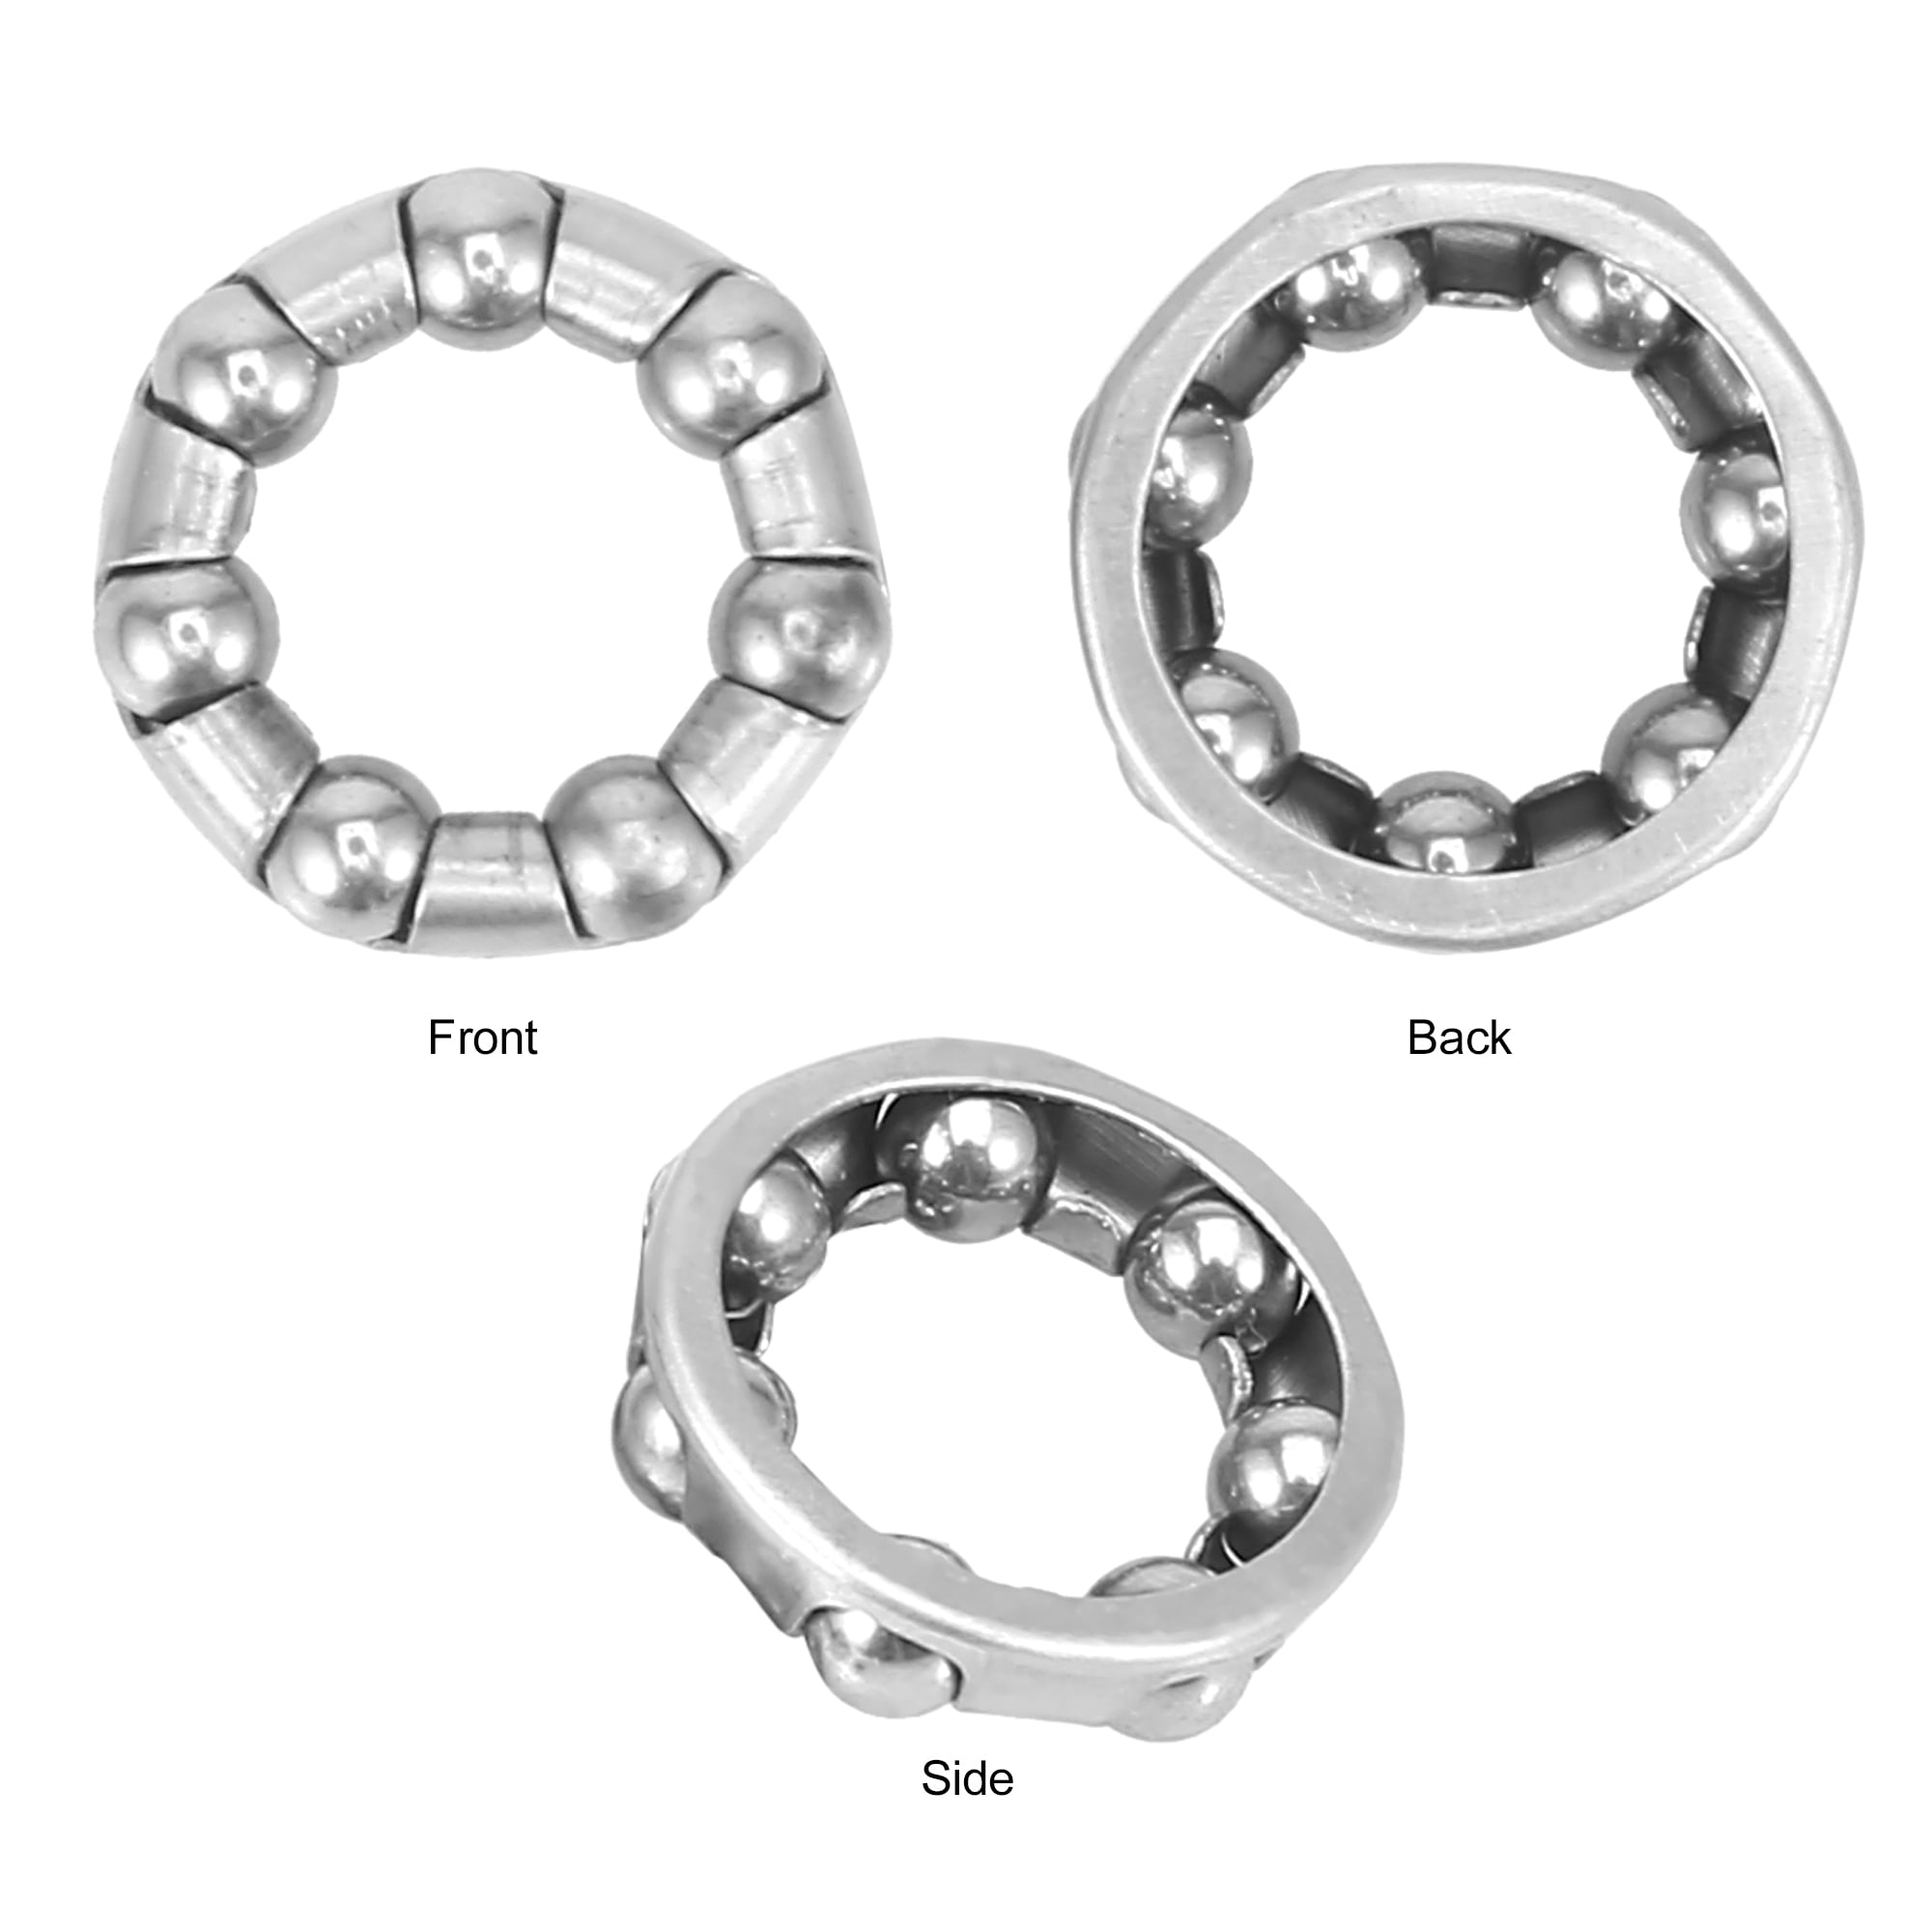 2pcs 20.5mm x 7 Ball Bearings Cages Crank Bearings Wheel Bearing Retainer  for Bicycle Silver Tone 